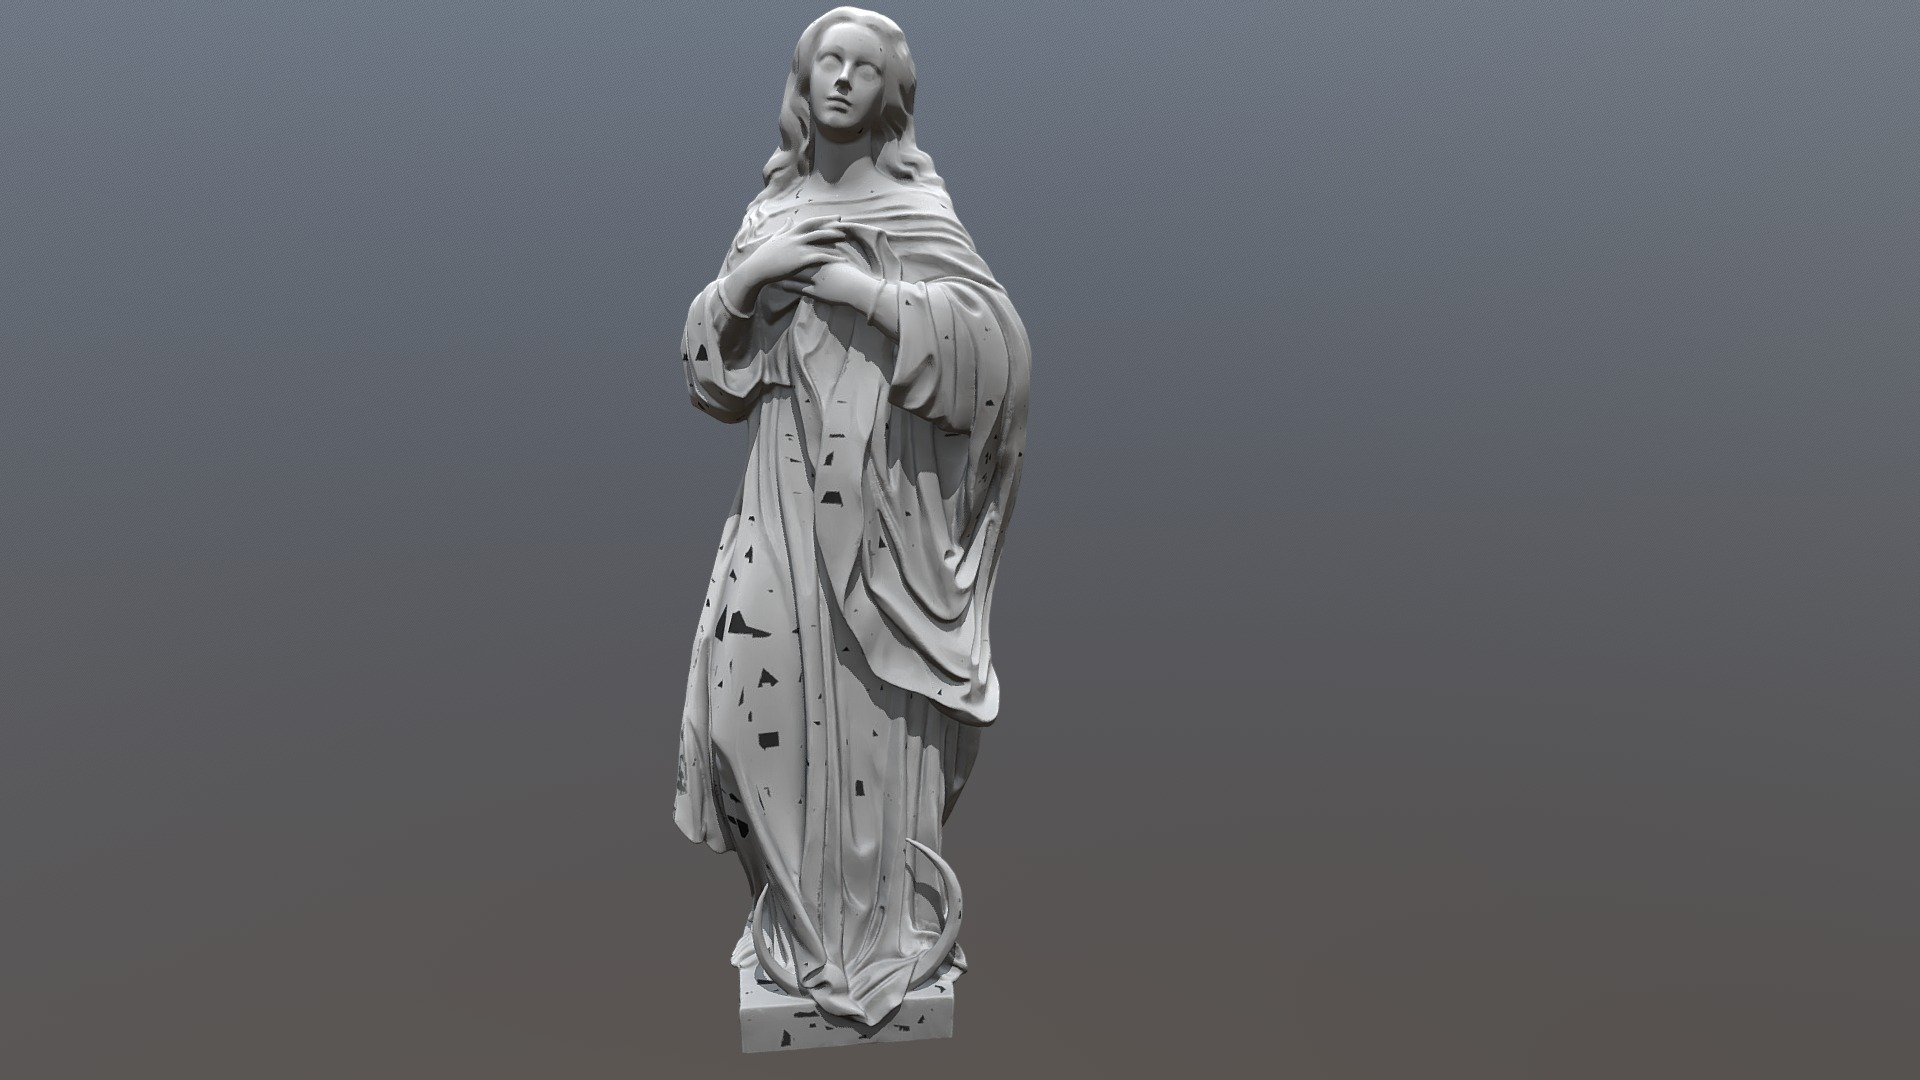 Published by 3ds Max
Using a arctic scanner, we scanned the heritage mother mary. Only found in Manila Cathedral. She is a rare icon of religious importance to the Philippine community. The lighting was done in vray 3ds max. As it was a colorless mesh. Give it the respect it deserves 3d model